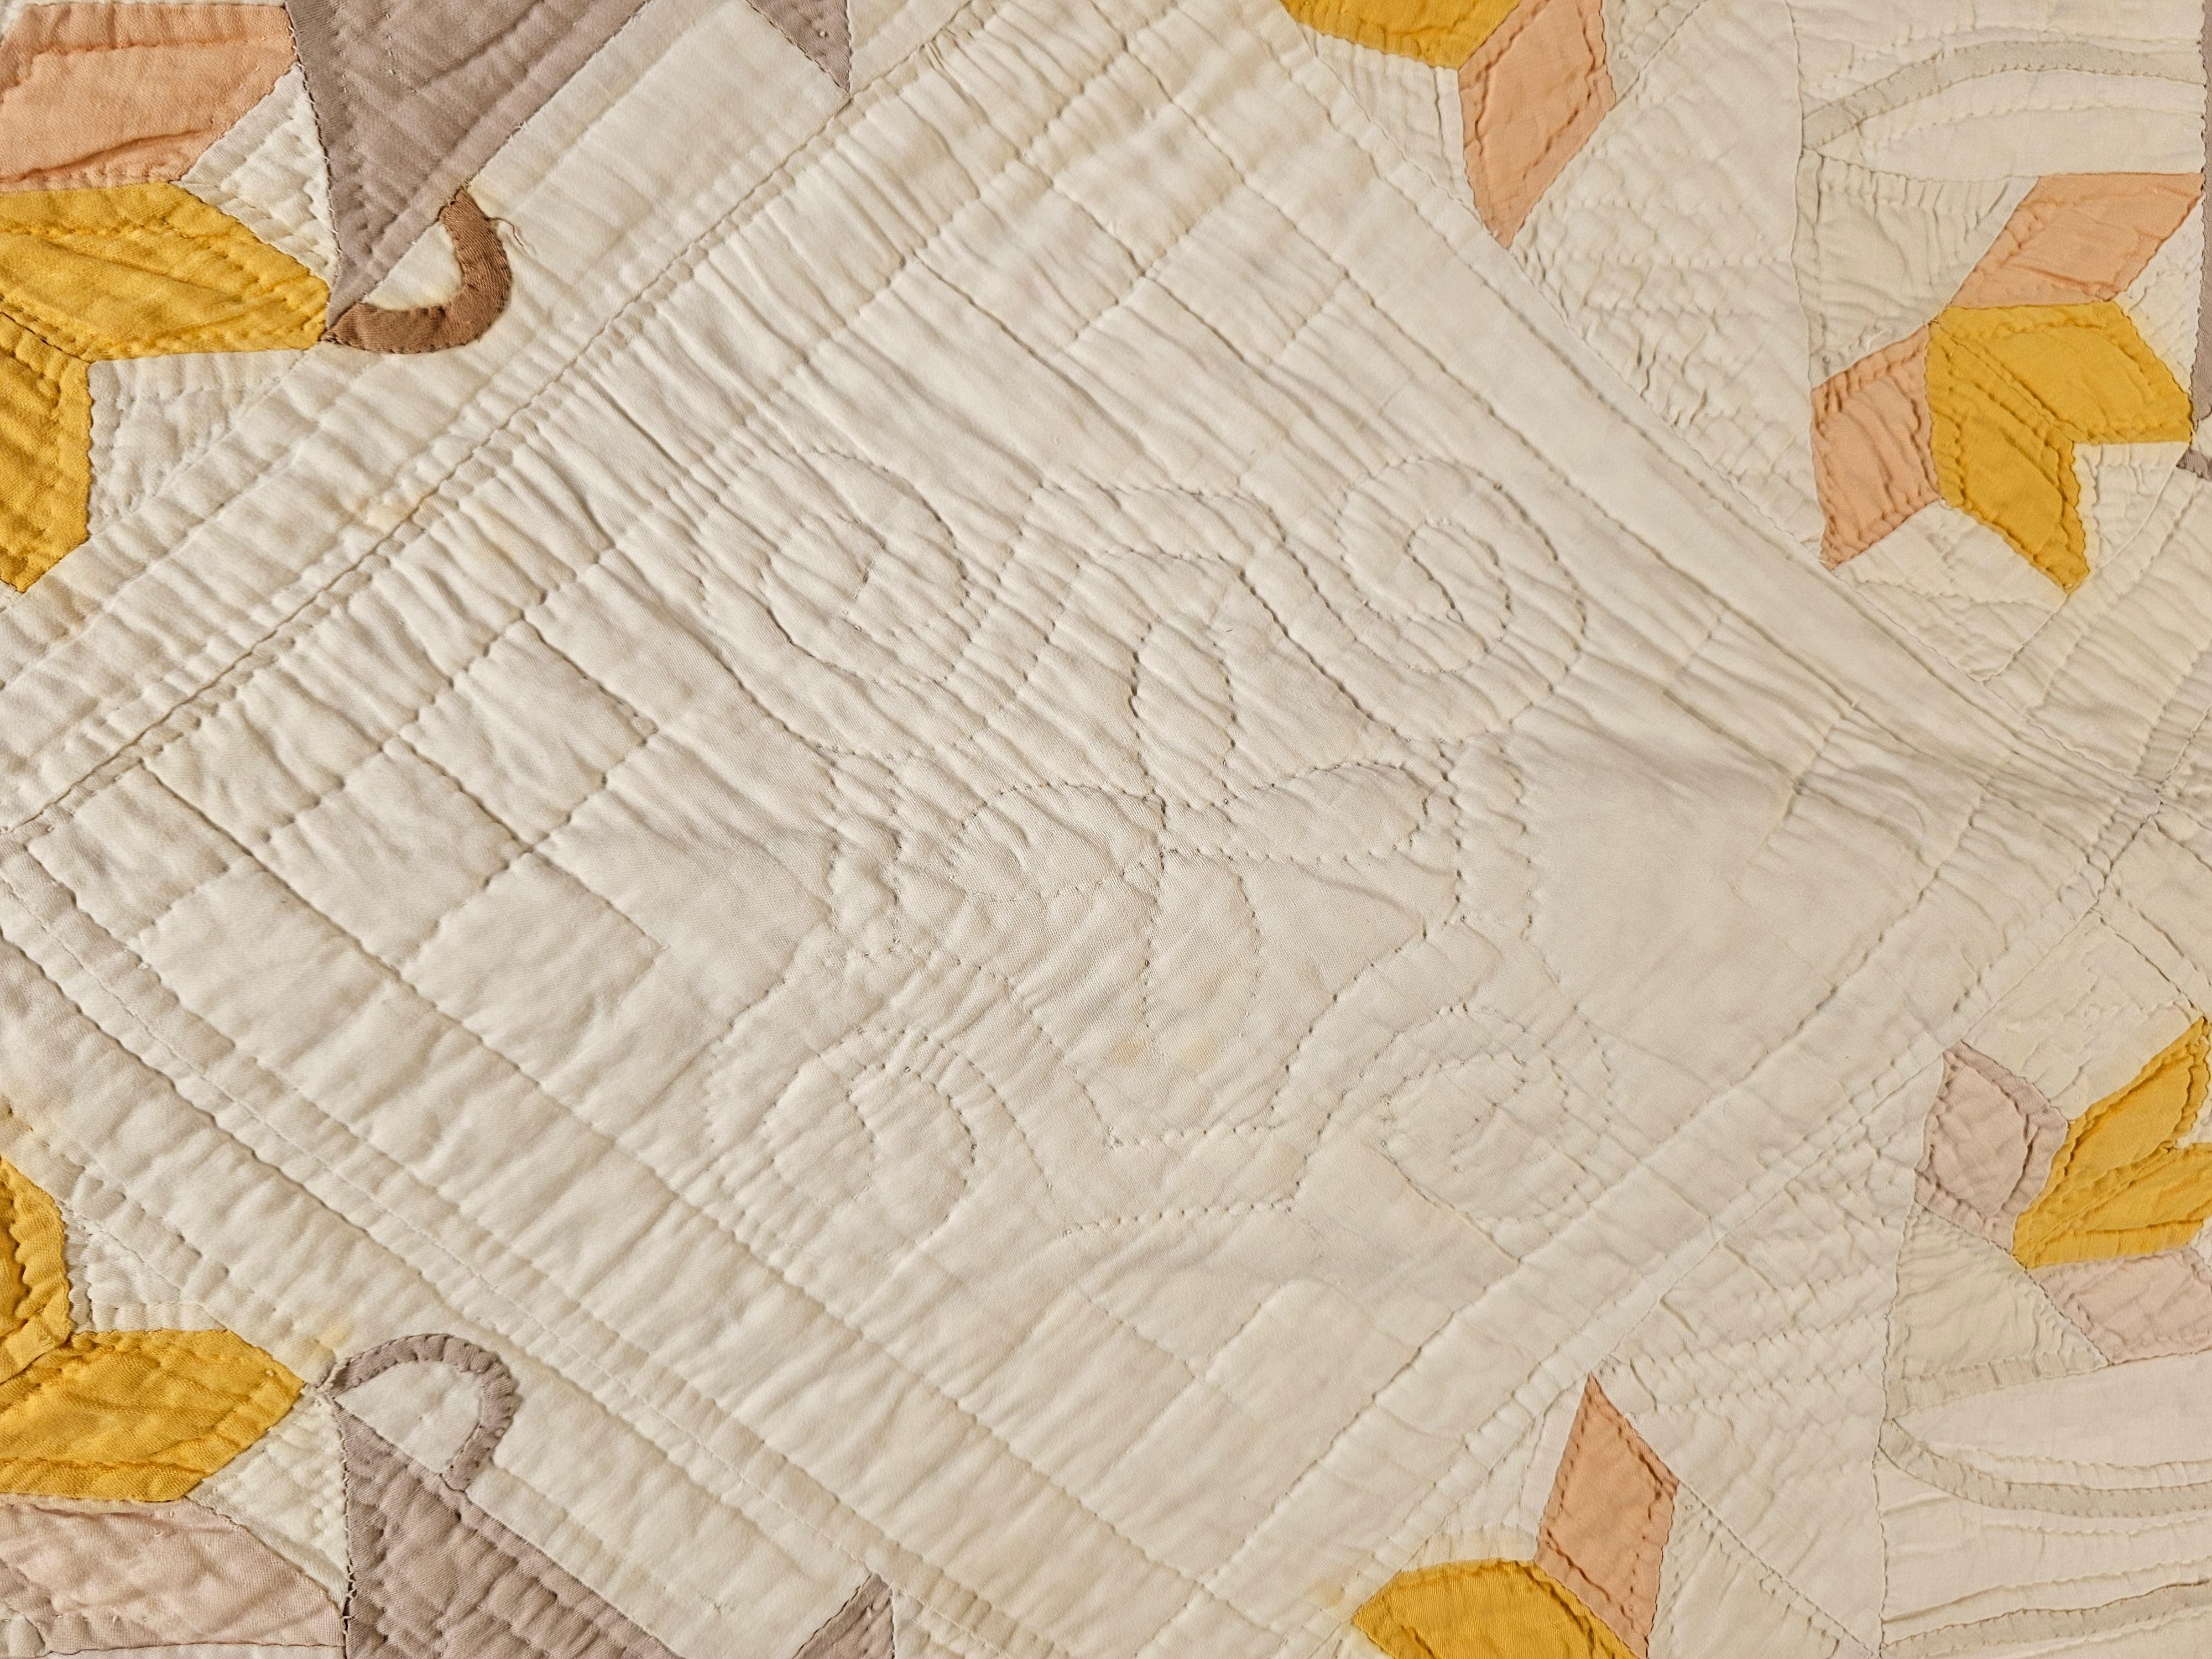 Vintage Hand Stitched Applique Quilt in Basket Pattern in Ivory, Brown, Yellow For Sale 2